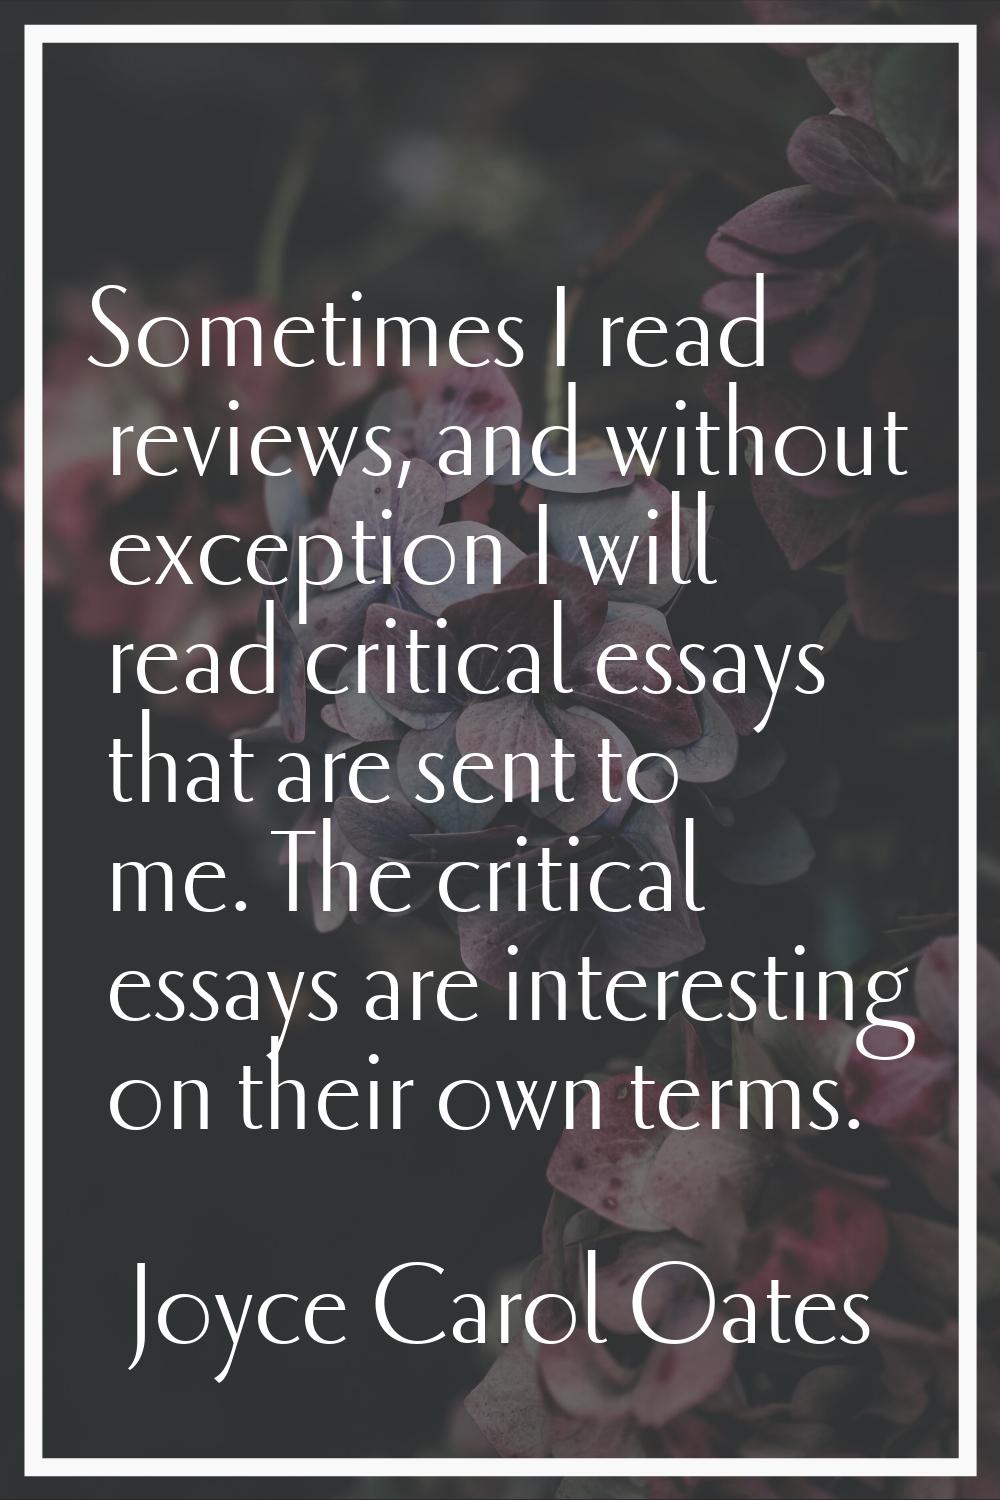 Sometimes I read reviews, and without exception I will read critical essays that are sent to me. Th